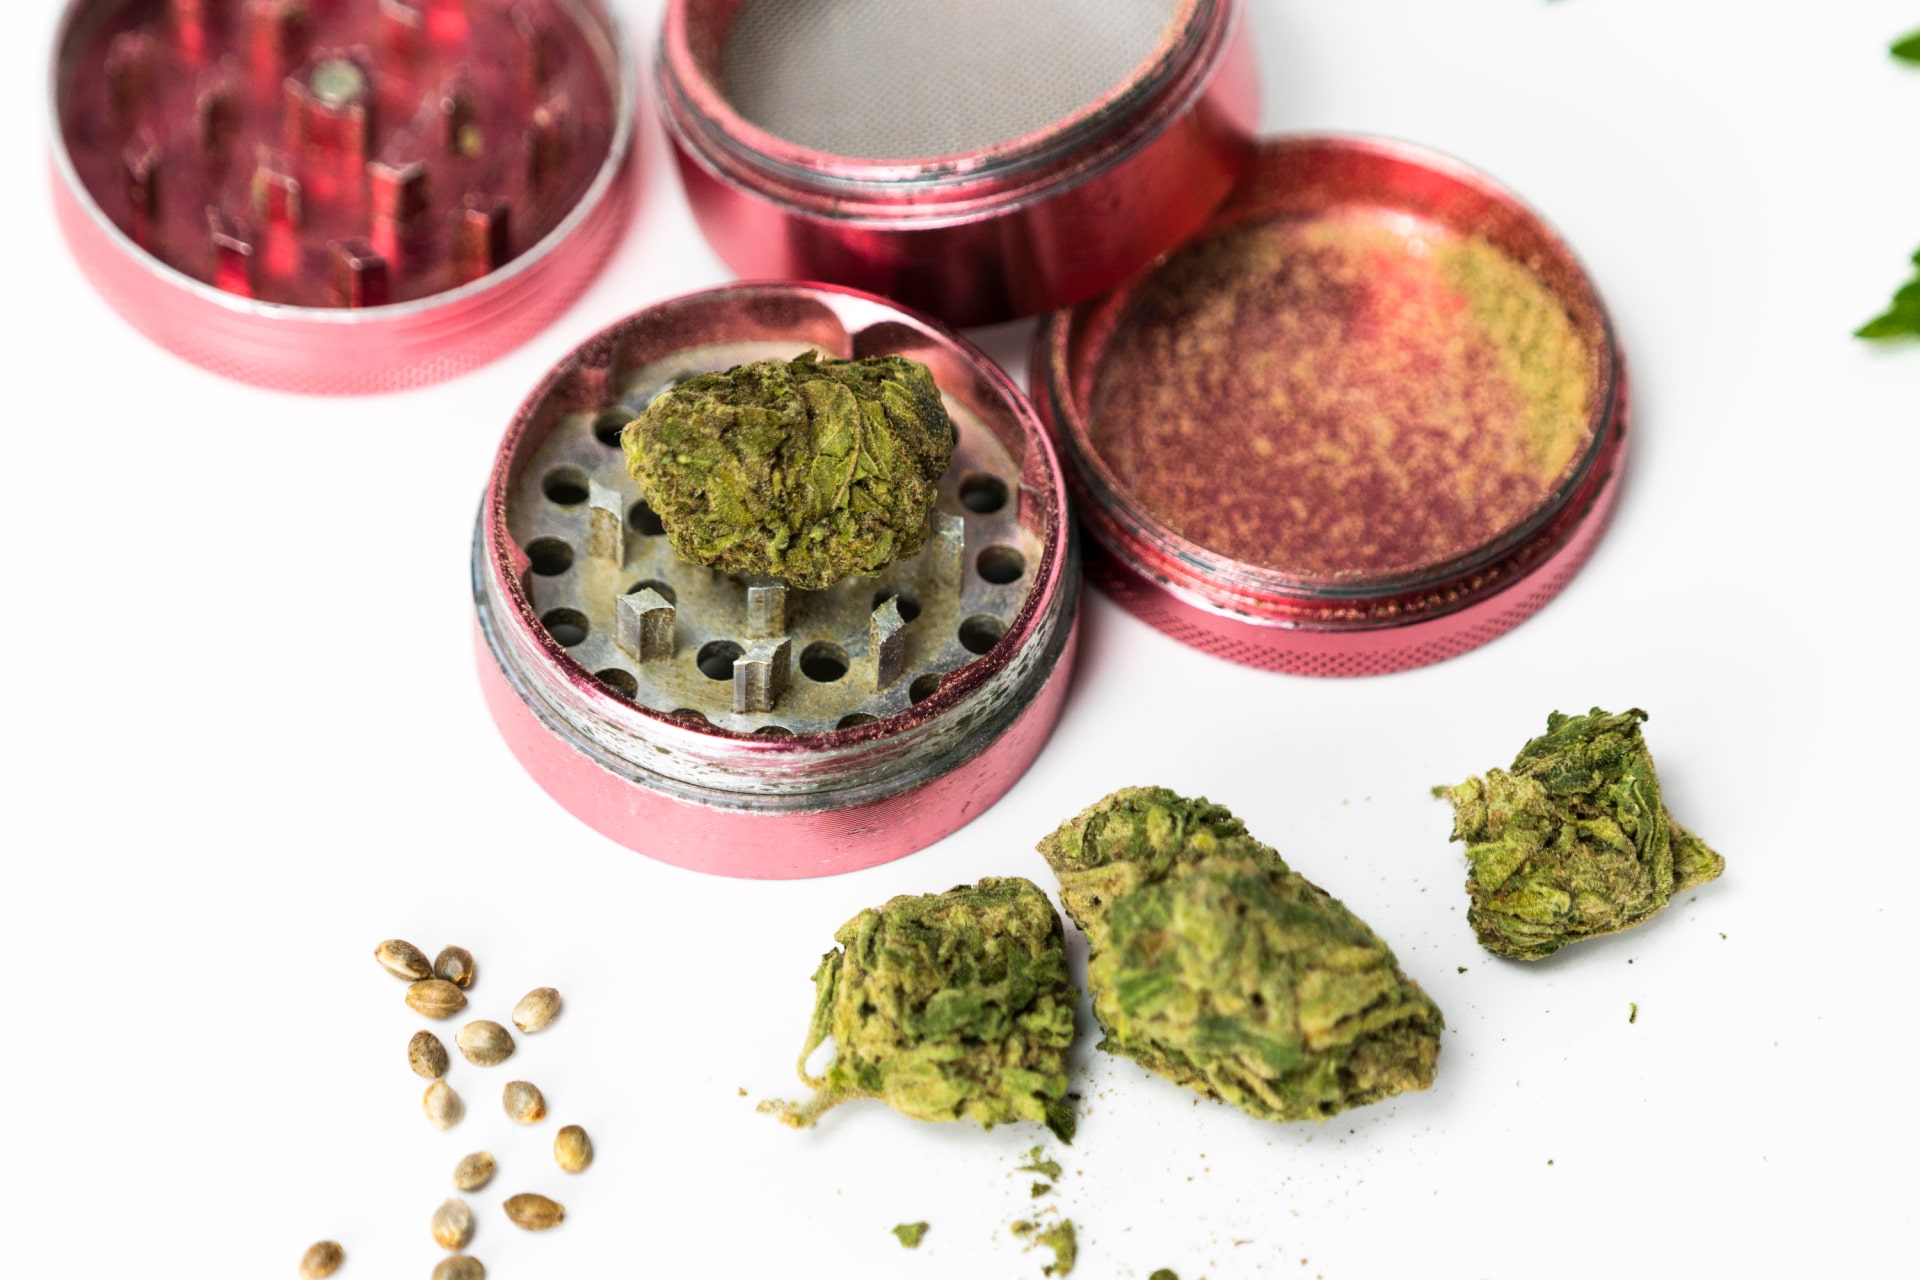 Herb grinder designed for cannabis flower. Kief is shown in the compartment on the right side, after passing through the screen in the multi-chambered flower grinder.